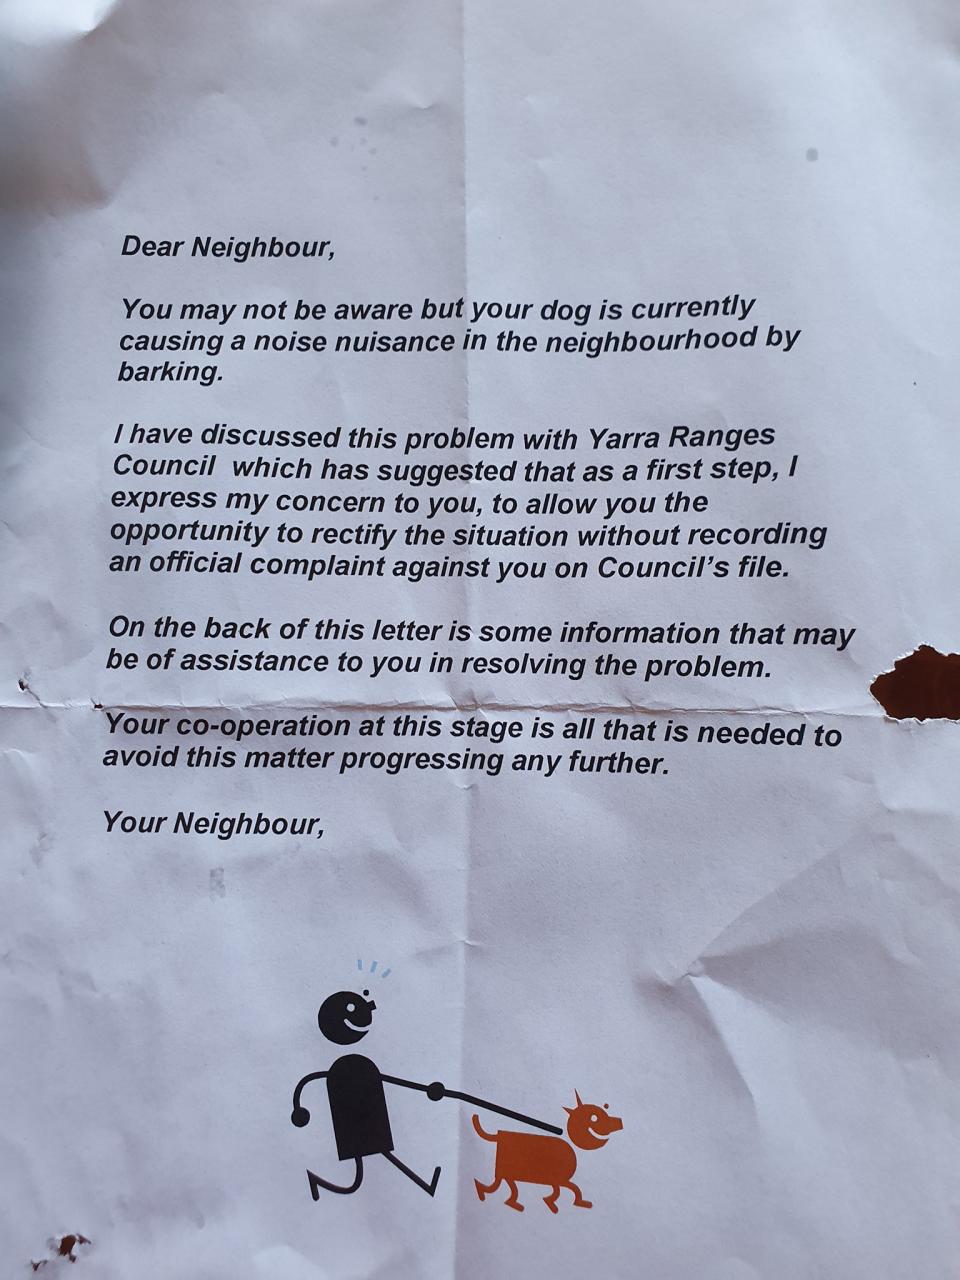 A note from a neighbour complaining about a barking dog.